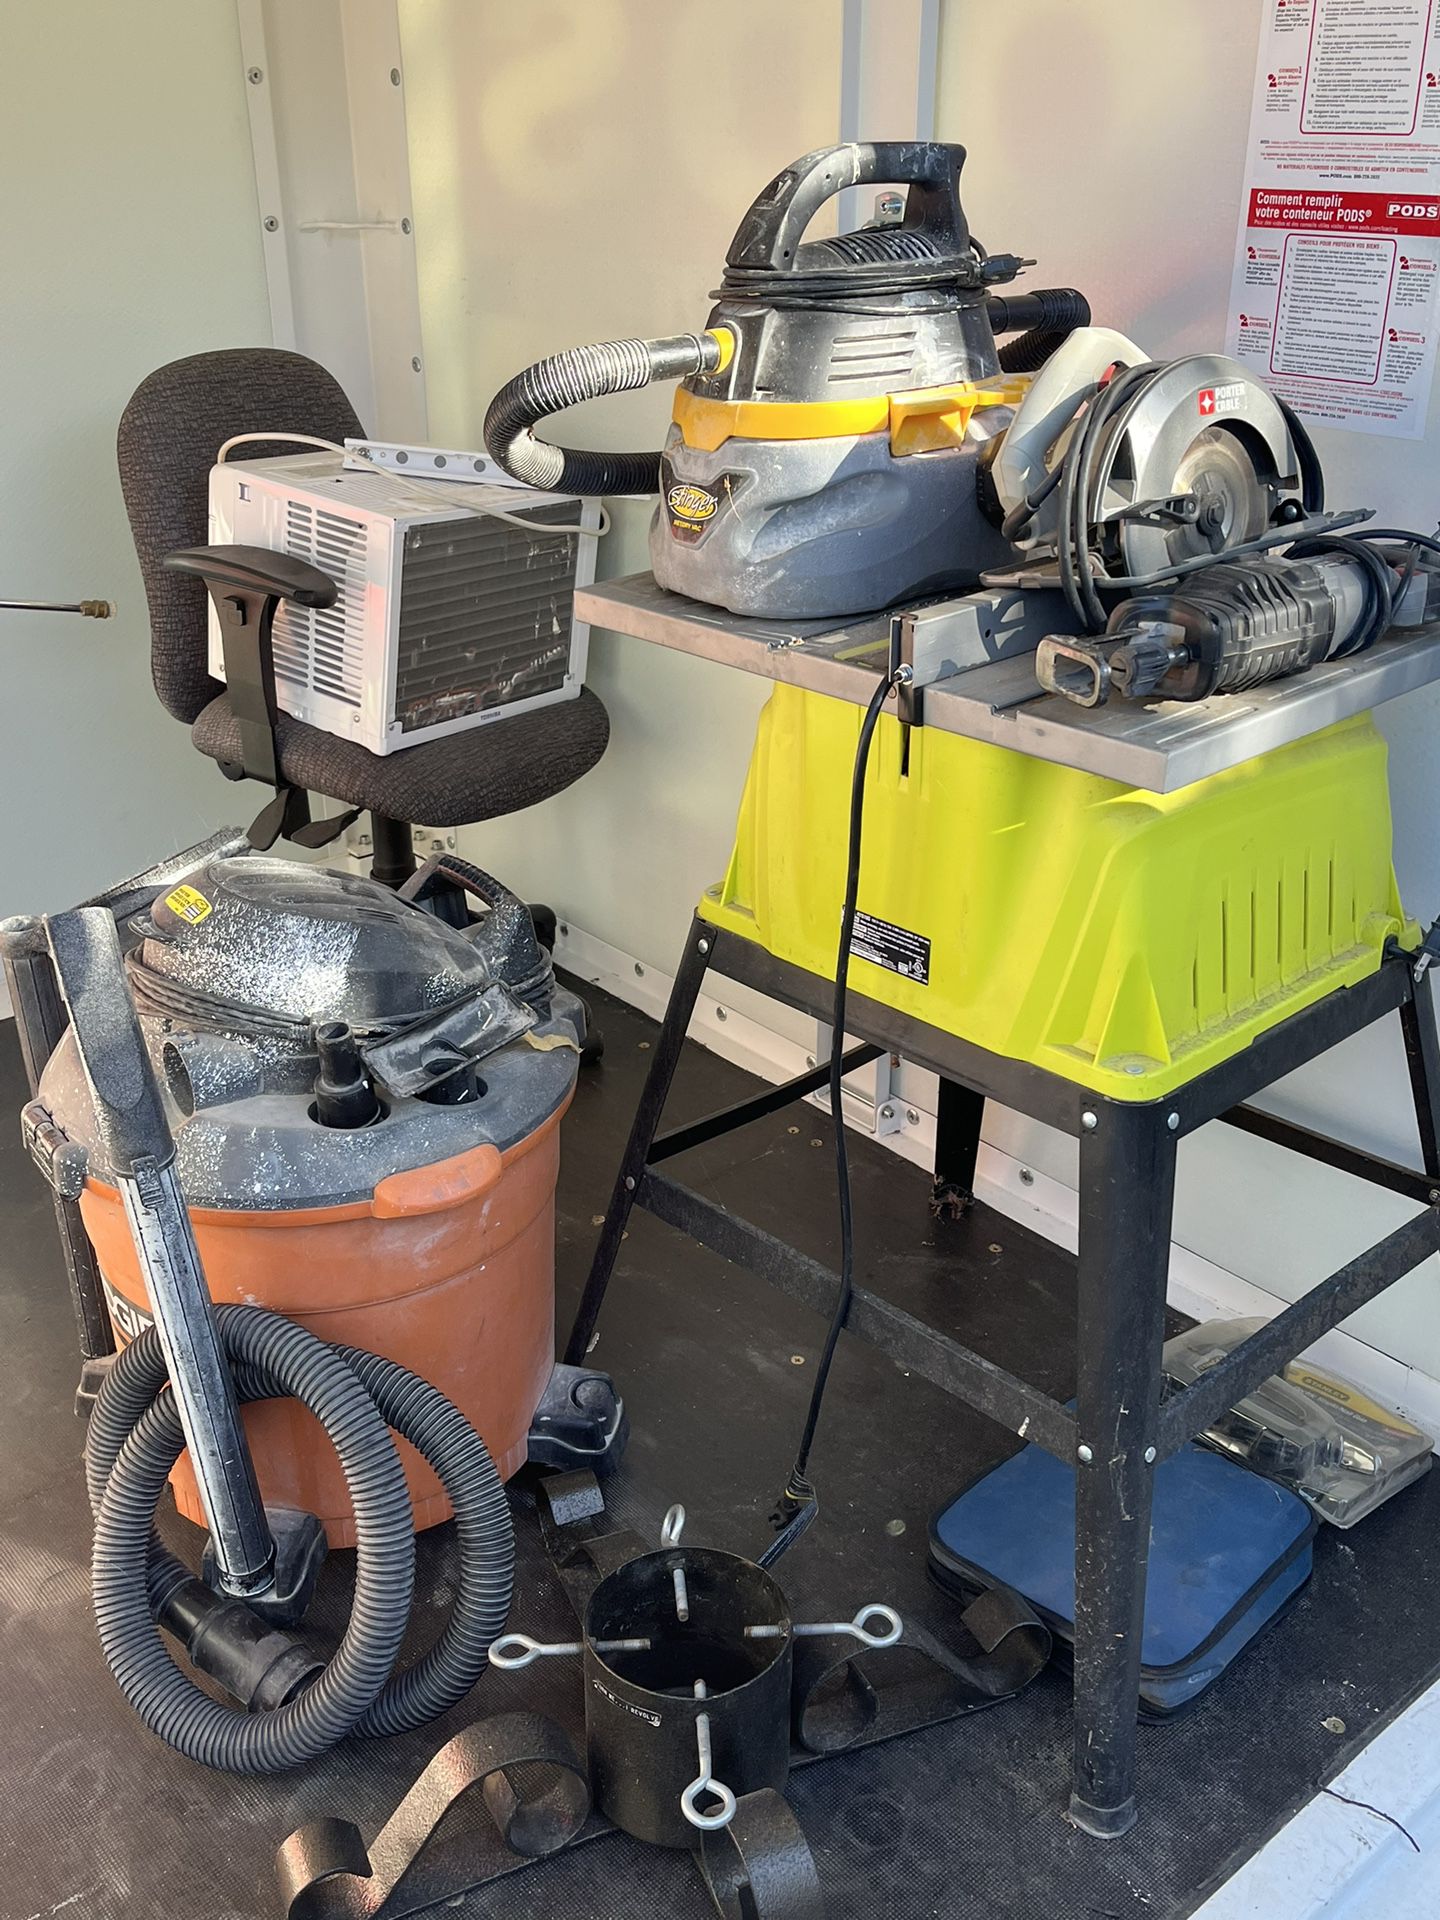 Tools And Machinery - Multiple Prices! All Negotiable.